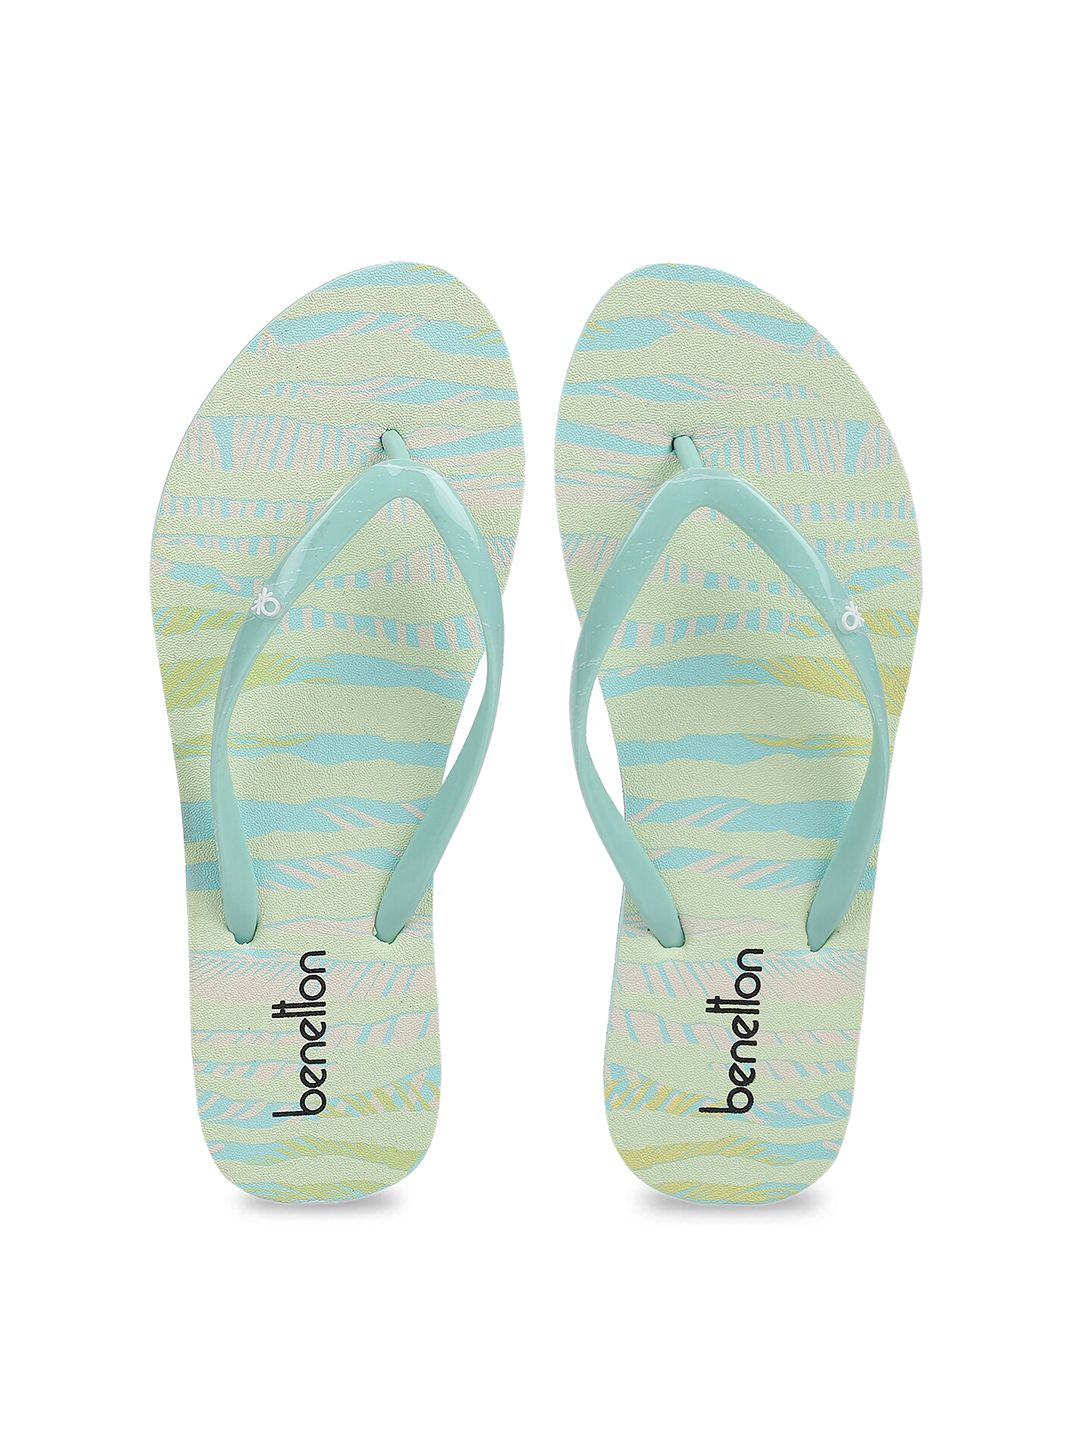 United Colors of Benetton Women Green & White Printed Rubber Thong Flip-Flops Price in India